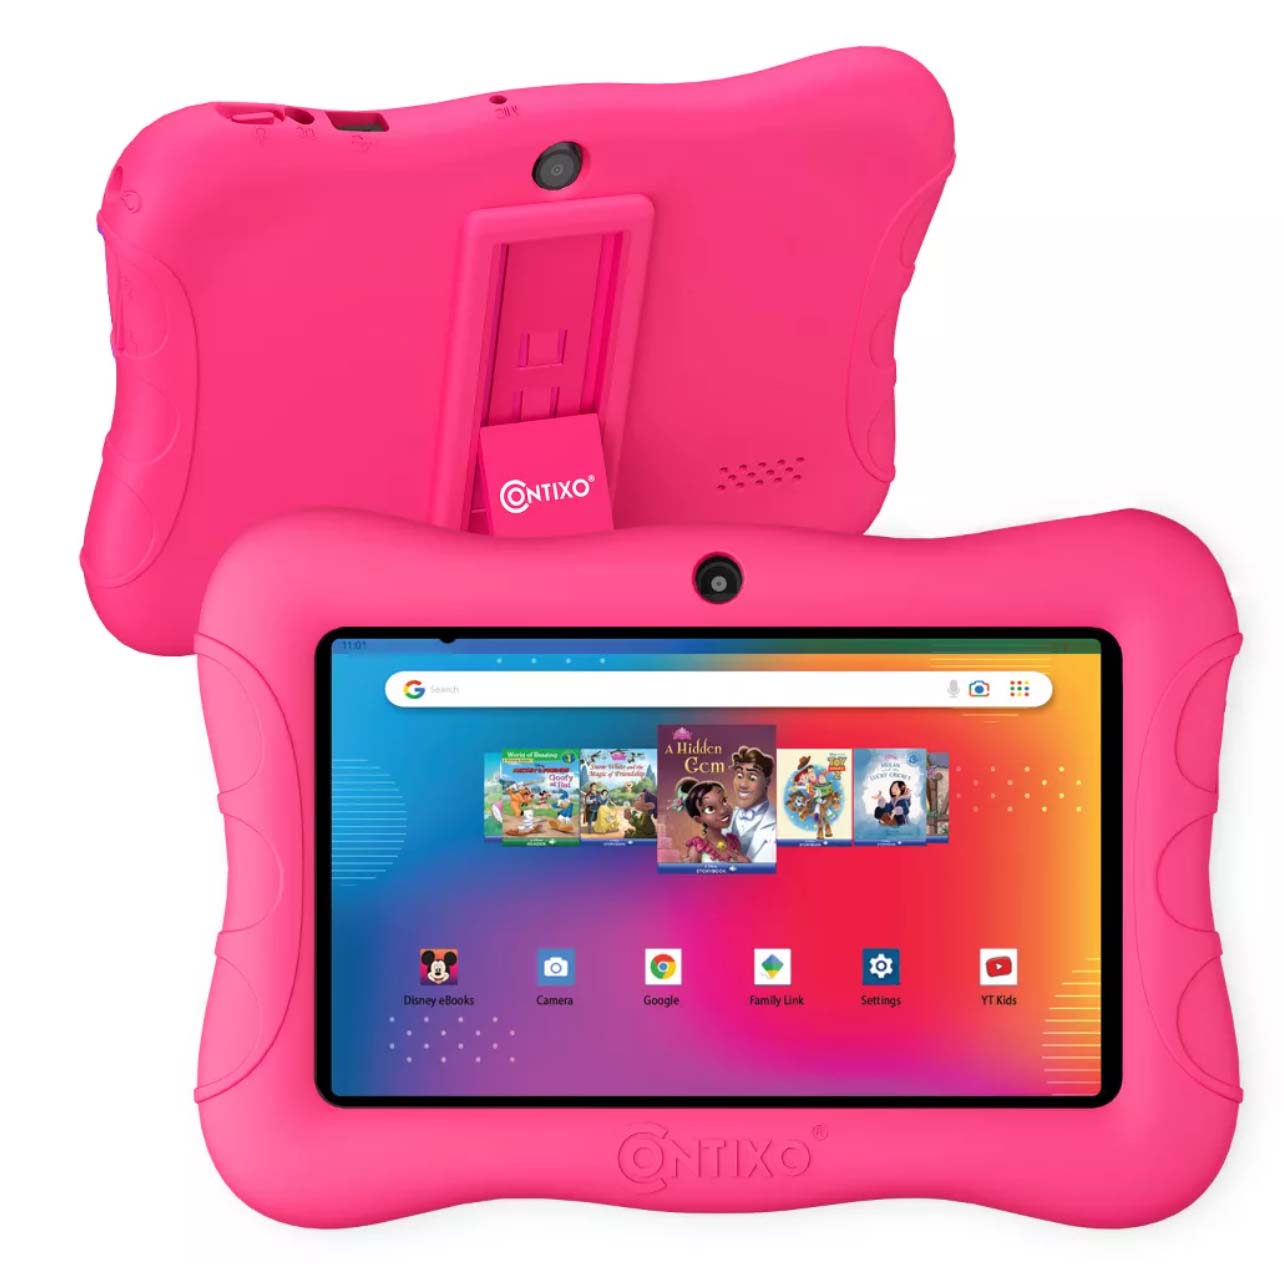 Pink Contixo 7-inch Android Kids Tablet